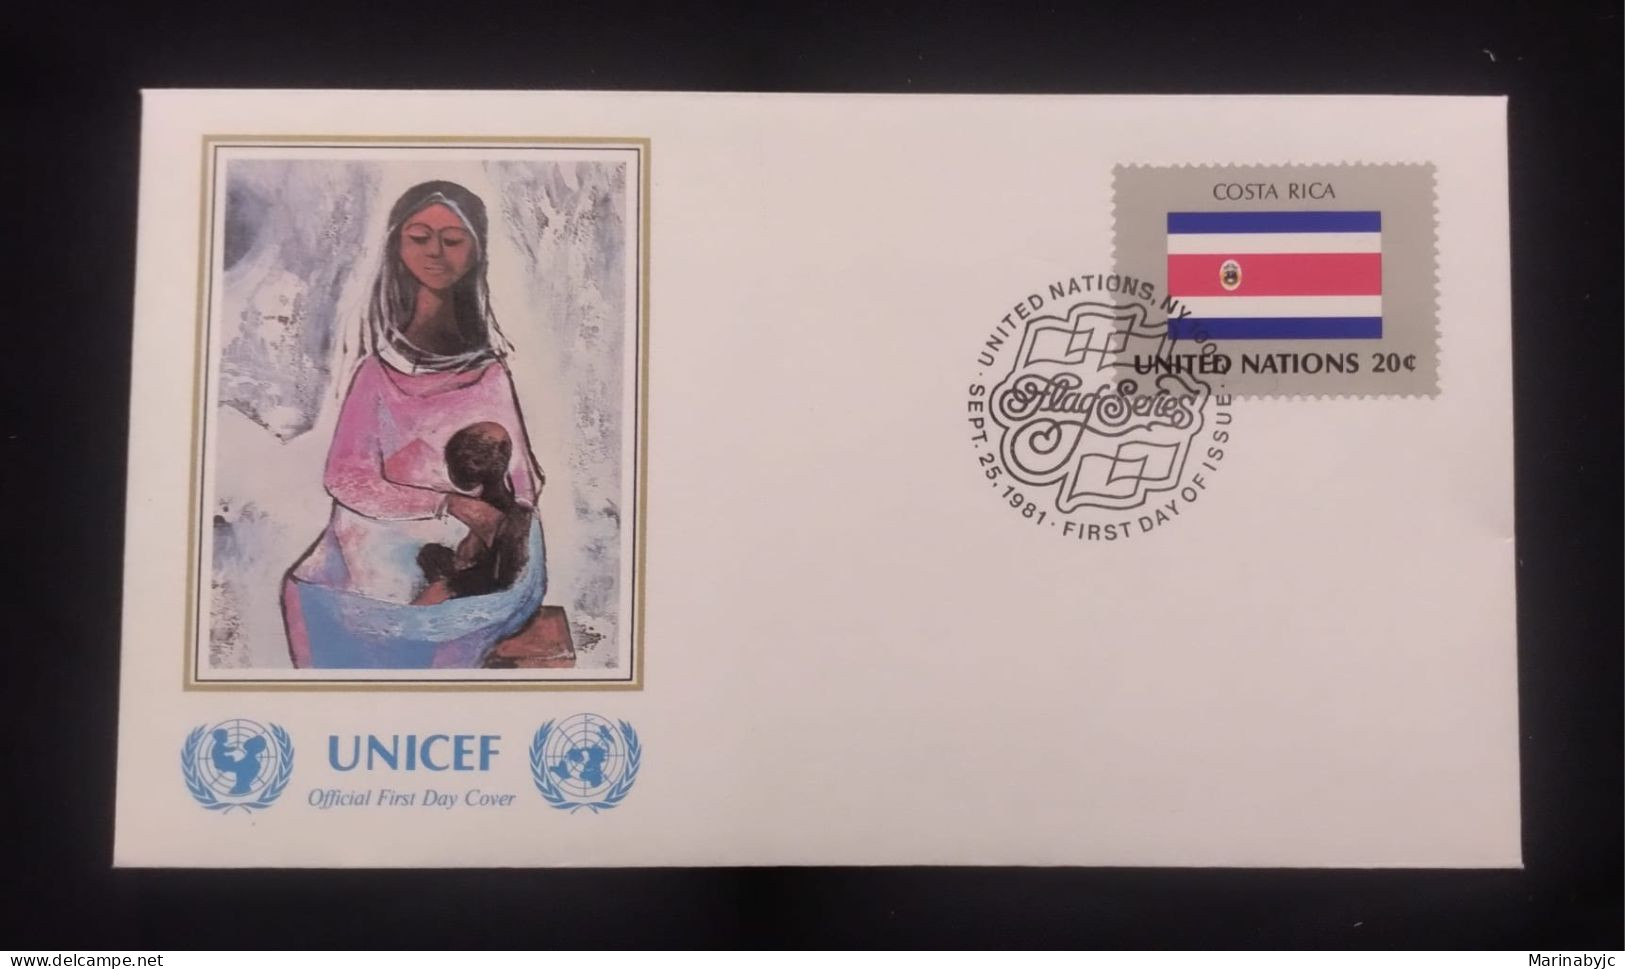 EL)1980 UNITED NATIONS, NATIONAL FLAG OF THE MEMBER COUNTRIES, COSTA RICA, ART - MOTHER AND CHILD PAINTING, UNICEF, FDC - Ongebruikt